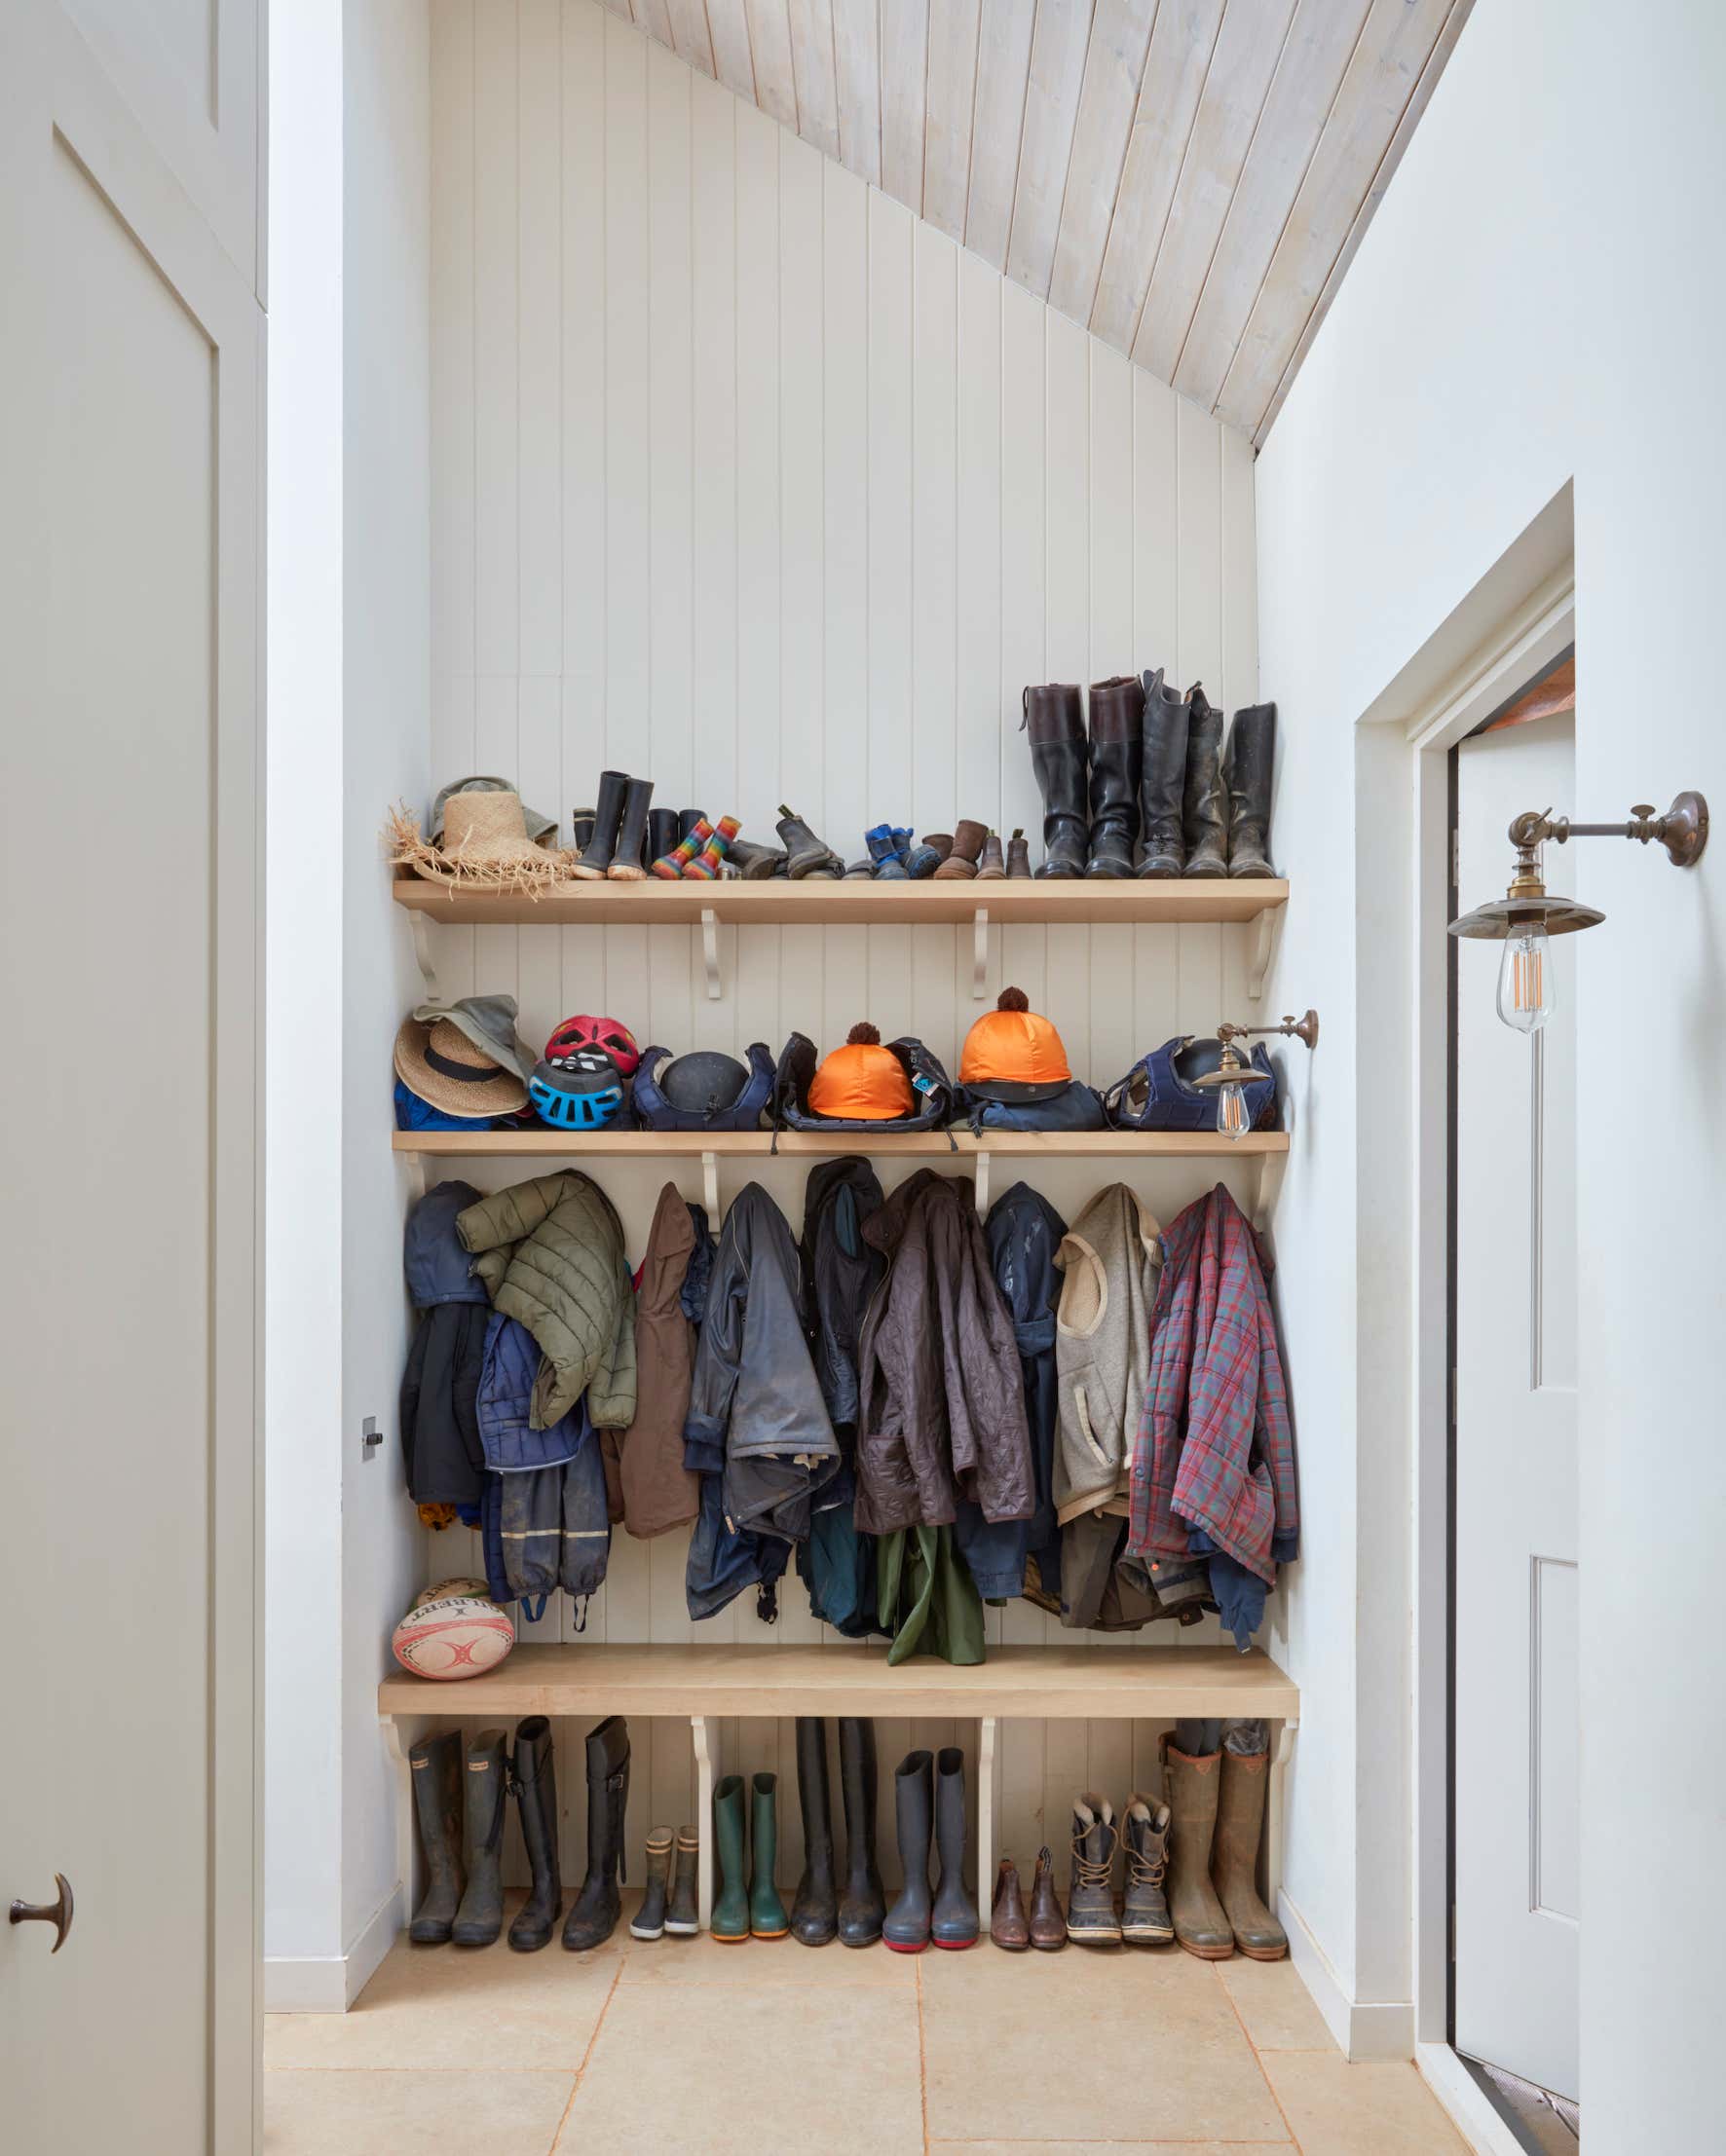 English Country Storage Room and Closet